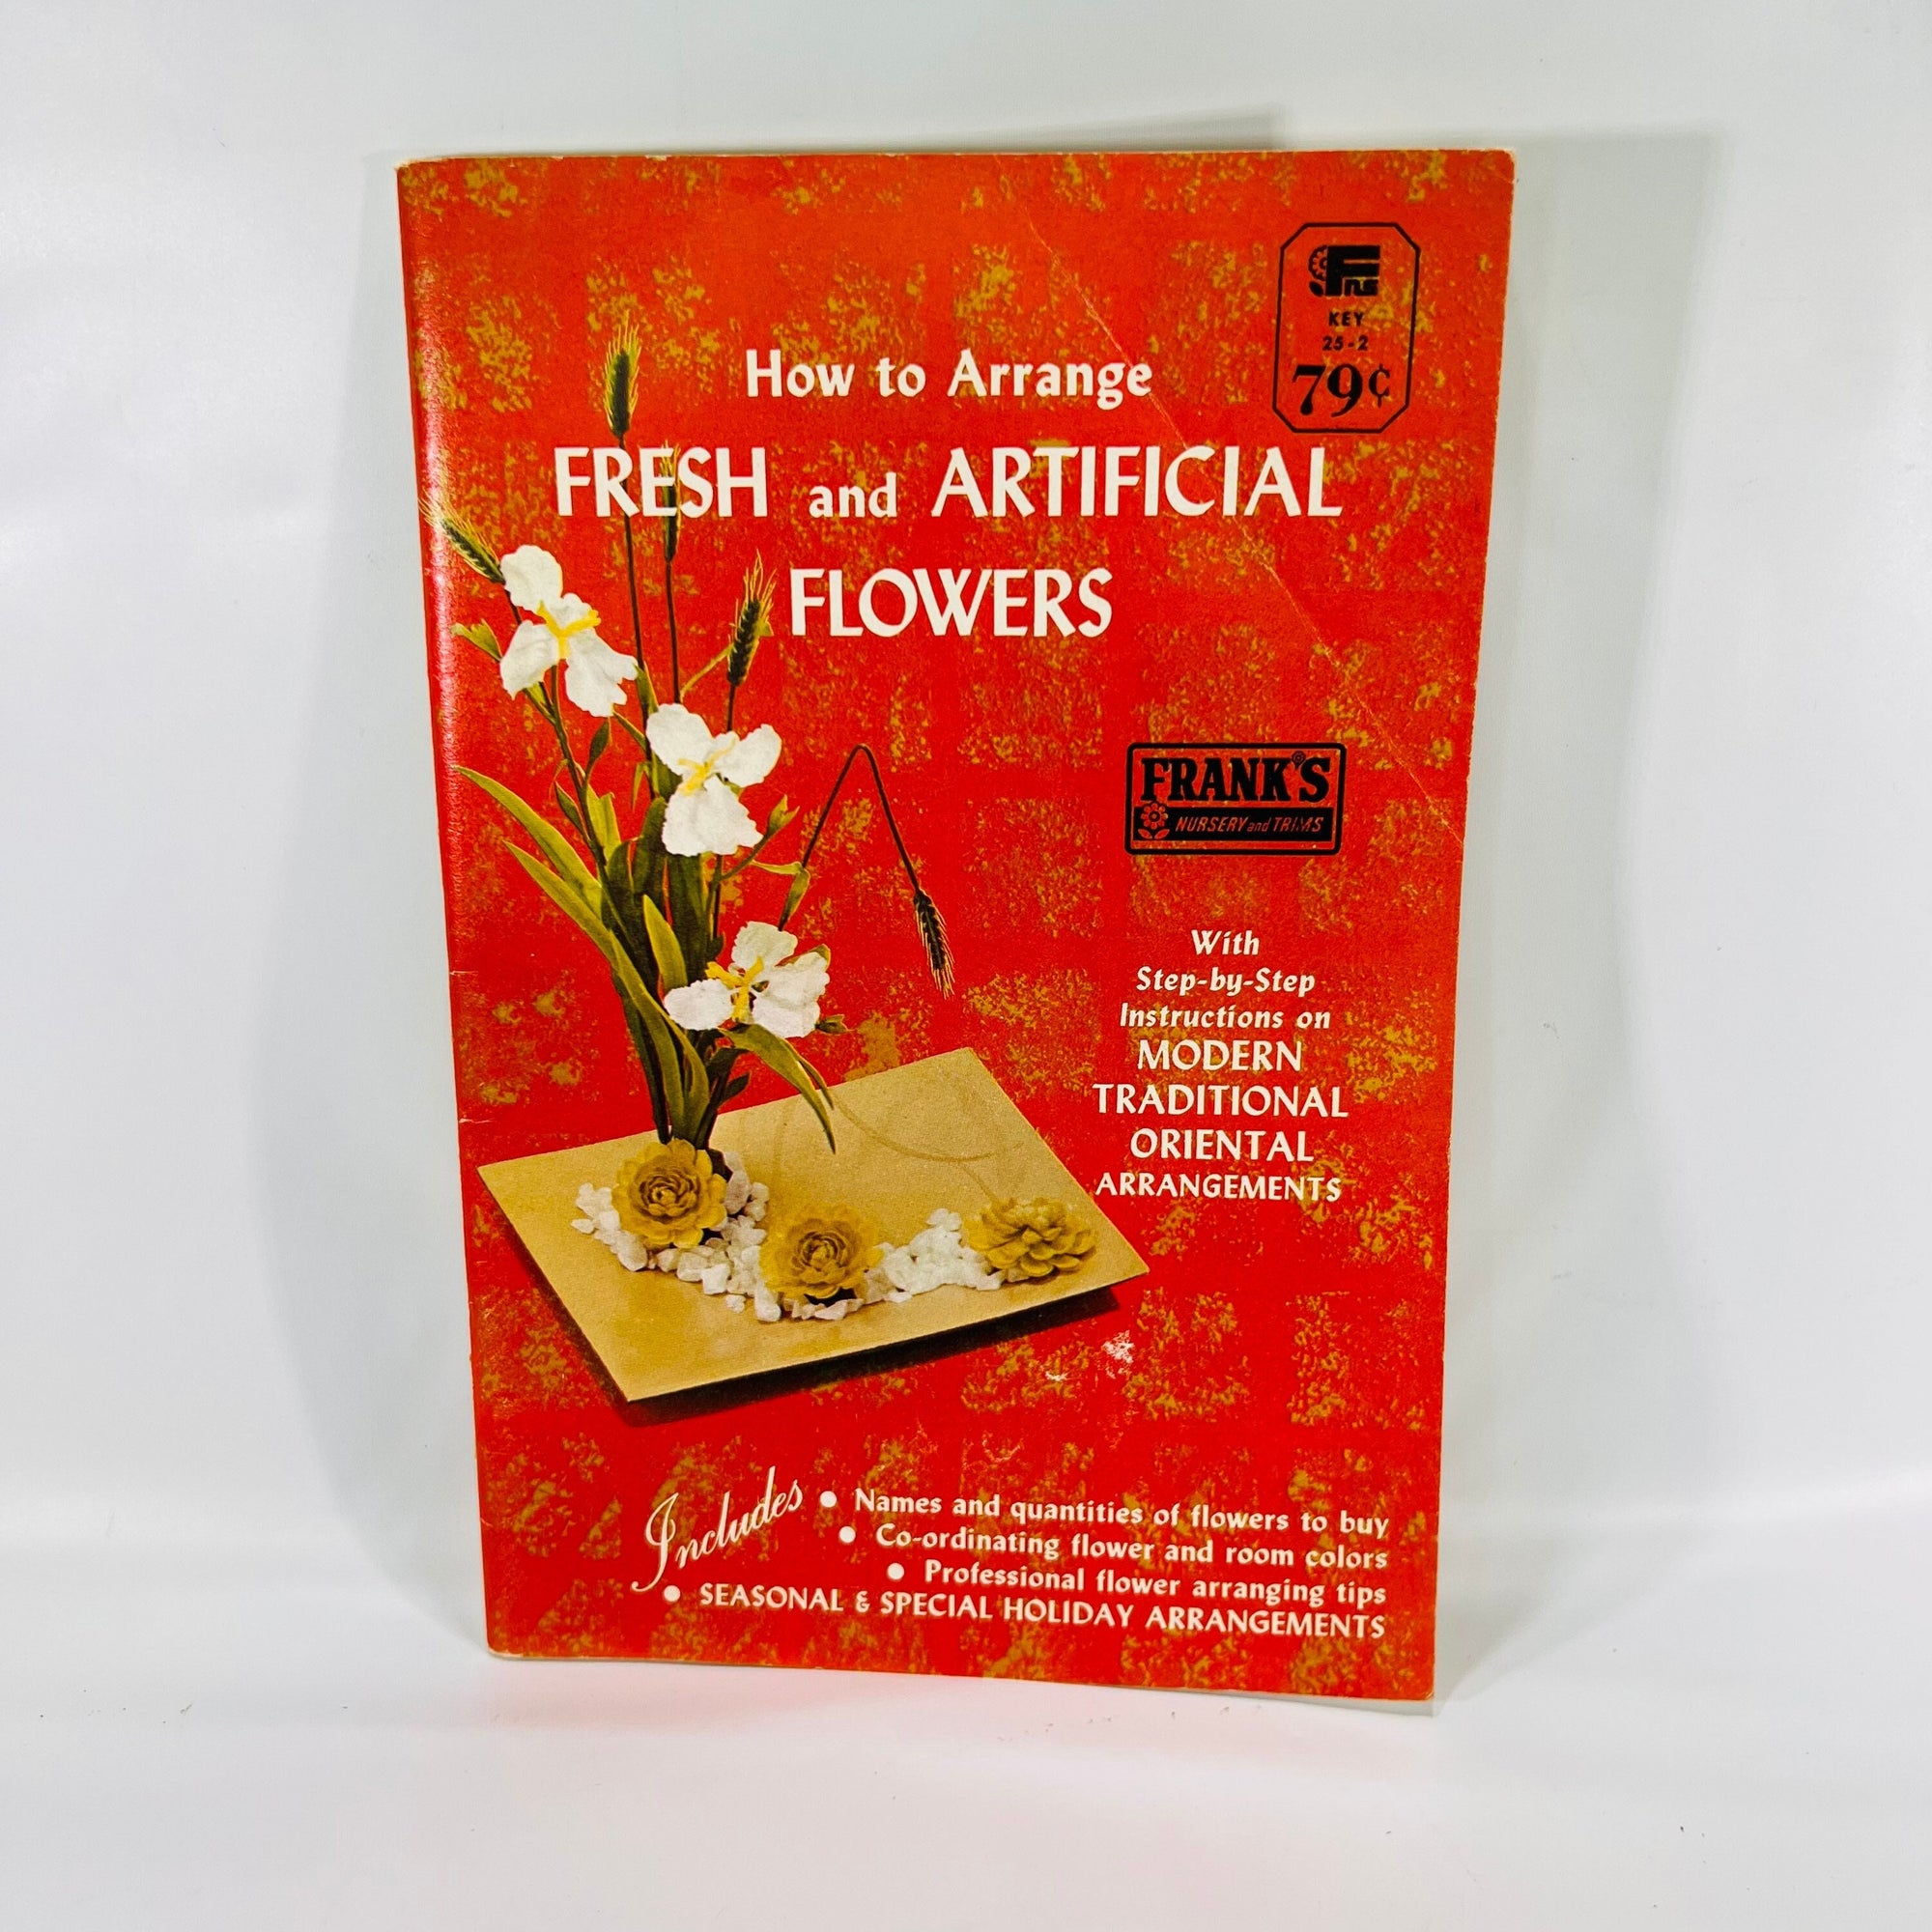 How to Arrange Fresh and Artificial Flowers distributed by Franks Nursery & Trims 1968 Instructions on Modern Traditional Oriental Vintage